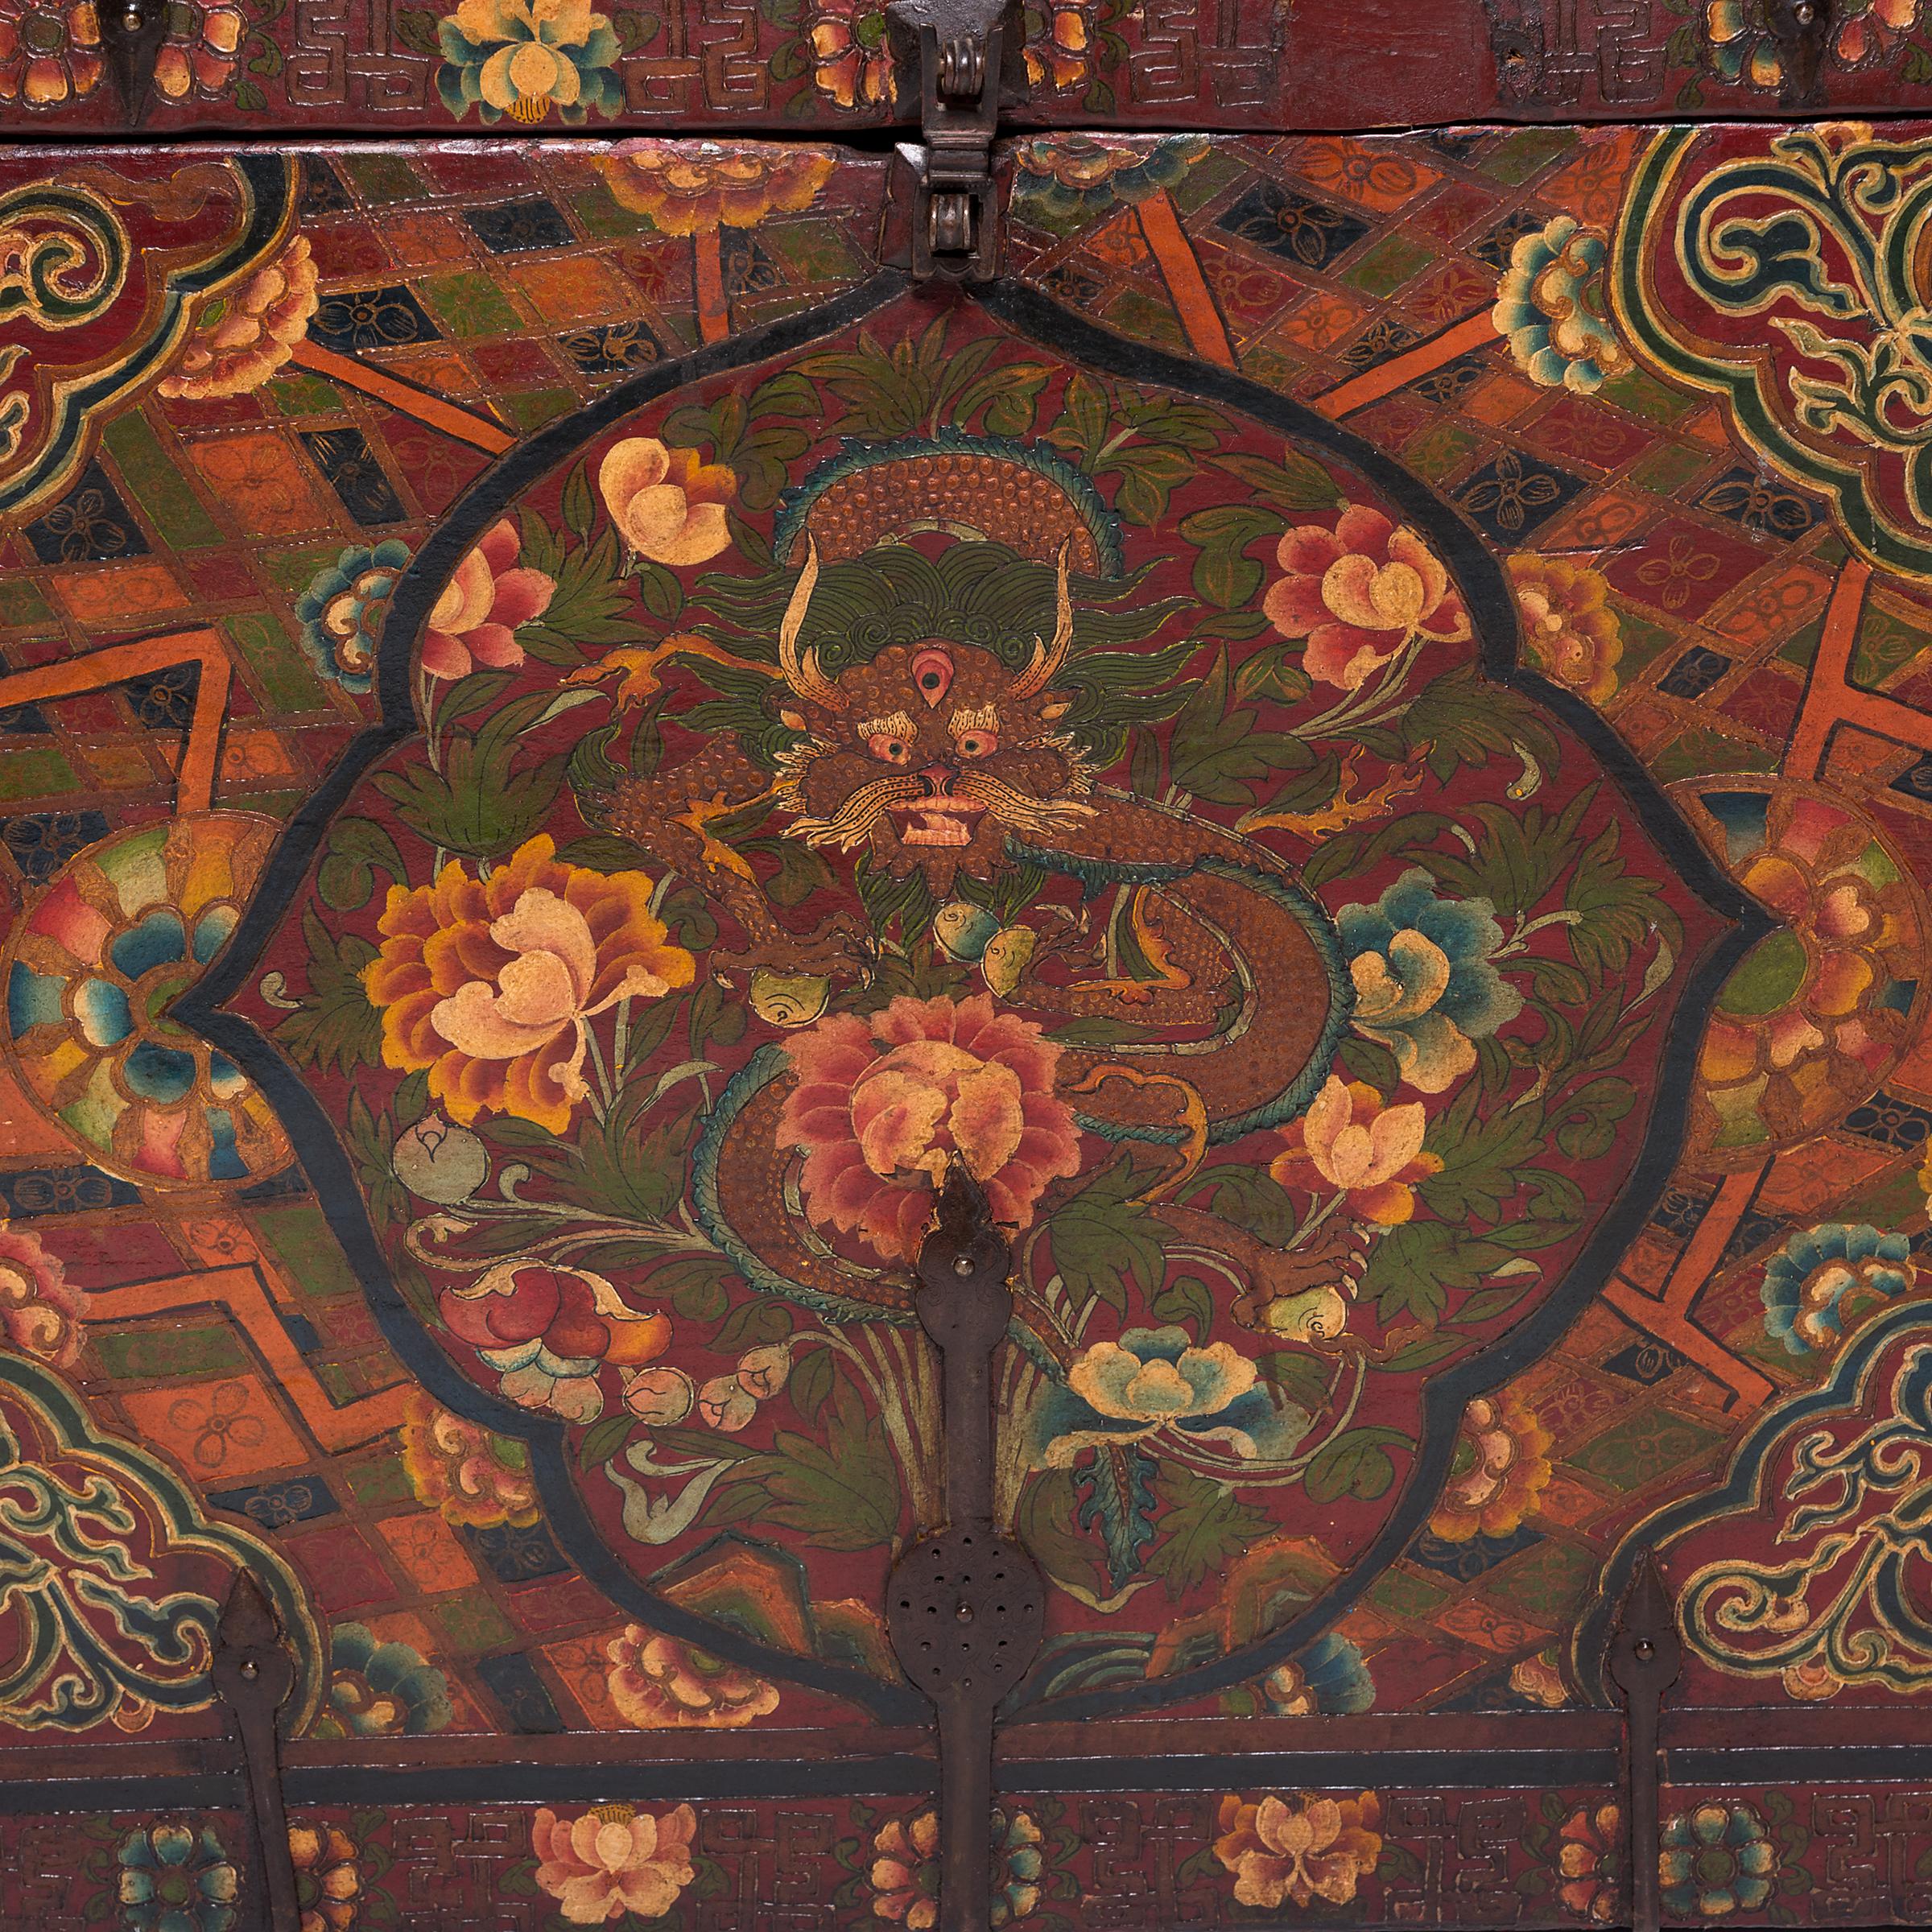 Ensconced in a cartouche filled with flowering peonies, a glorious dragon stares out from his heavenly realm on this brilliantly painted trunk. An early example of painted Tibetan furniture, the chest is lavishly decorated with emblems symbolic of